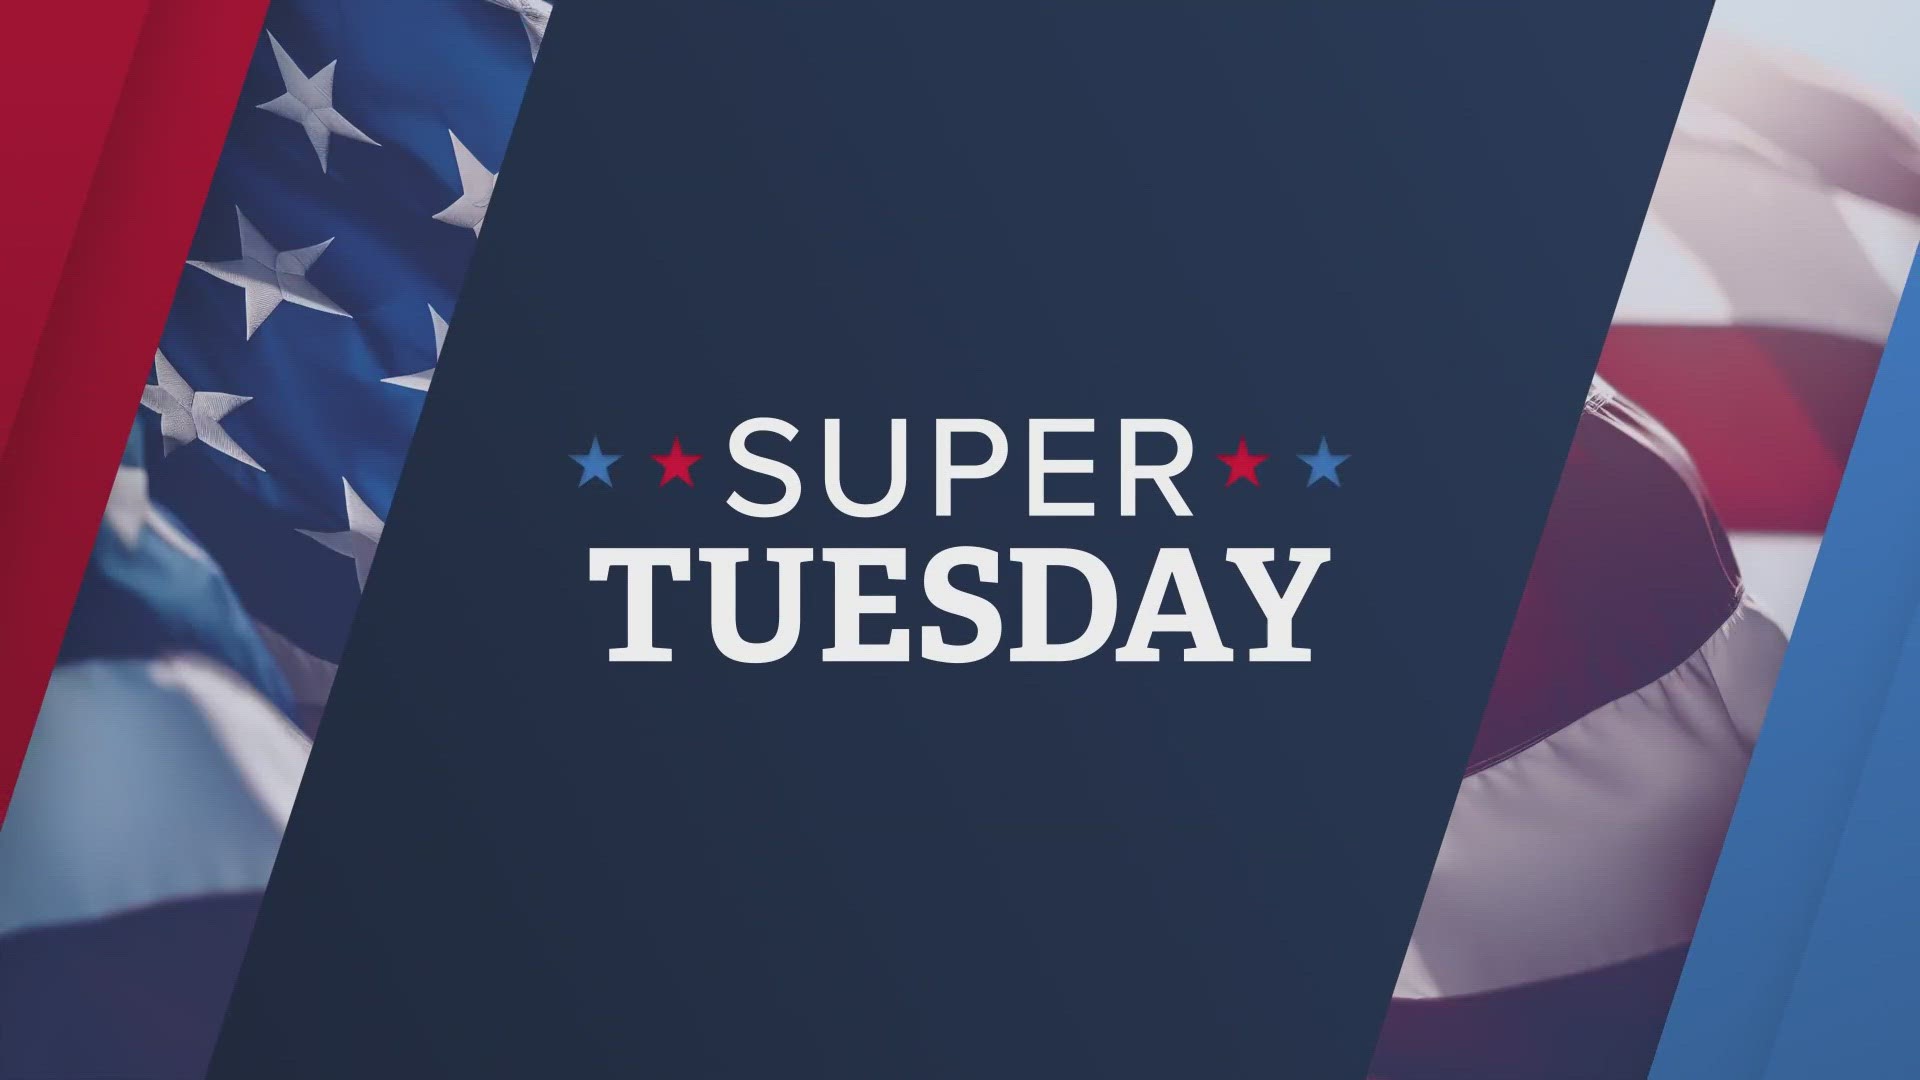 Virginia is one of 15 states participating in Super Tuesday, which is when the most states hold presidential primary elections on the same day.